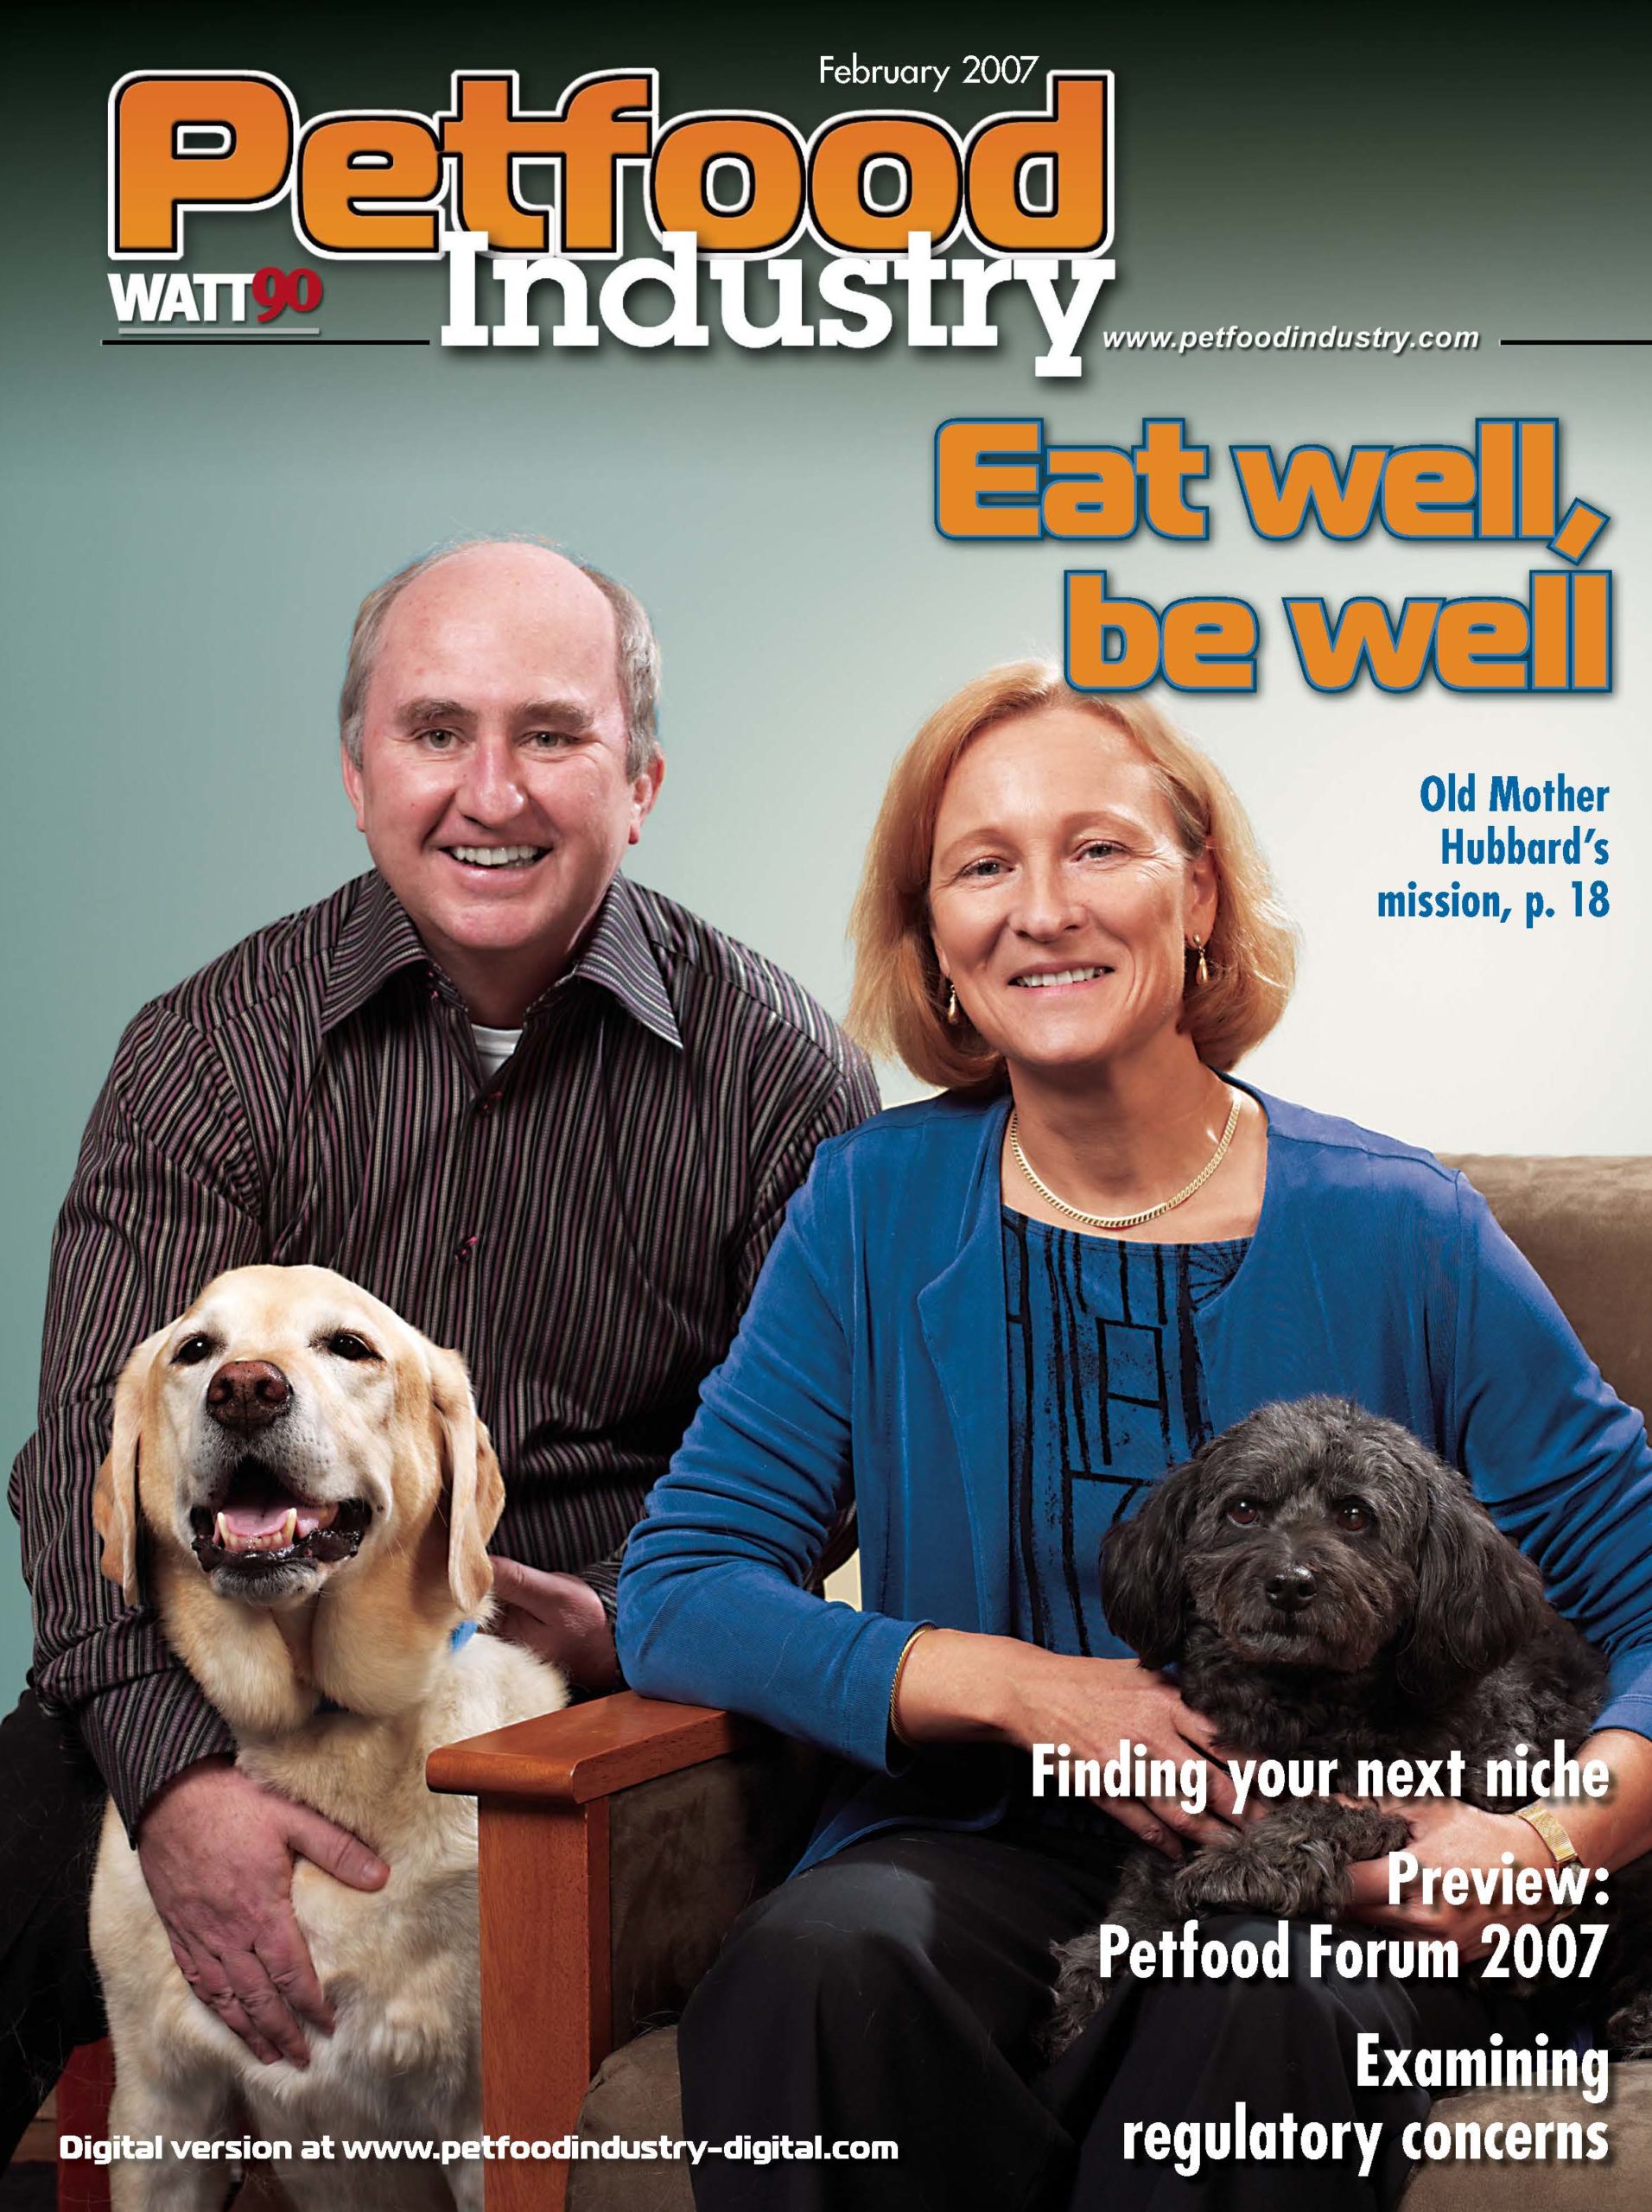 Petfood Industry: Innovation Leads To Growth